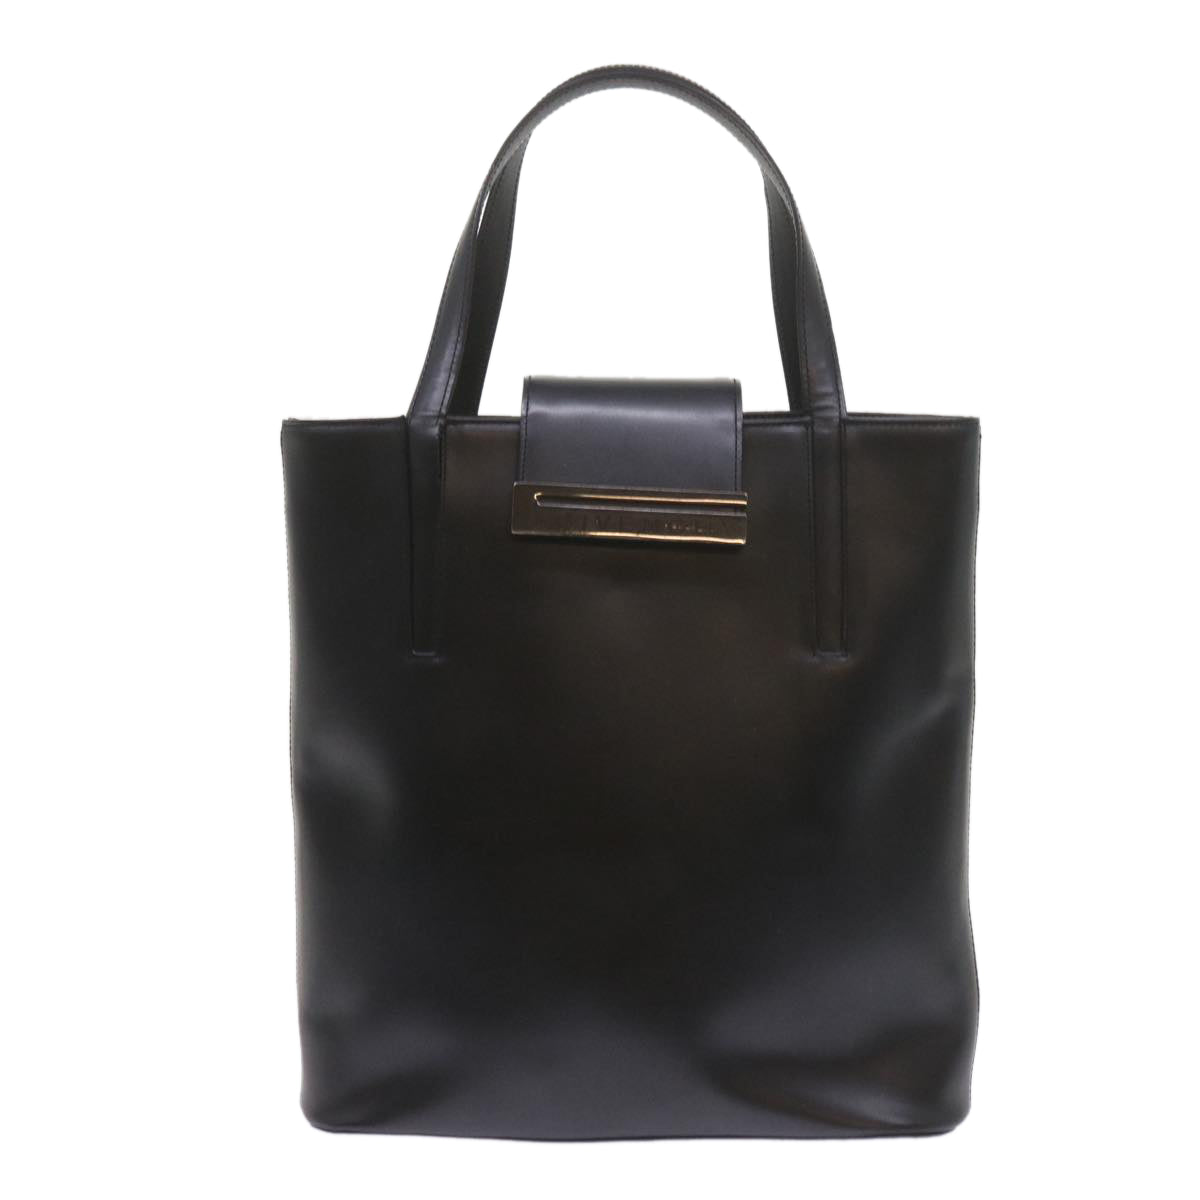 GIVENCHY Tote Bag Leather Black Auth am5241